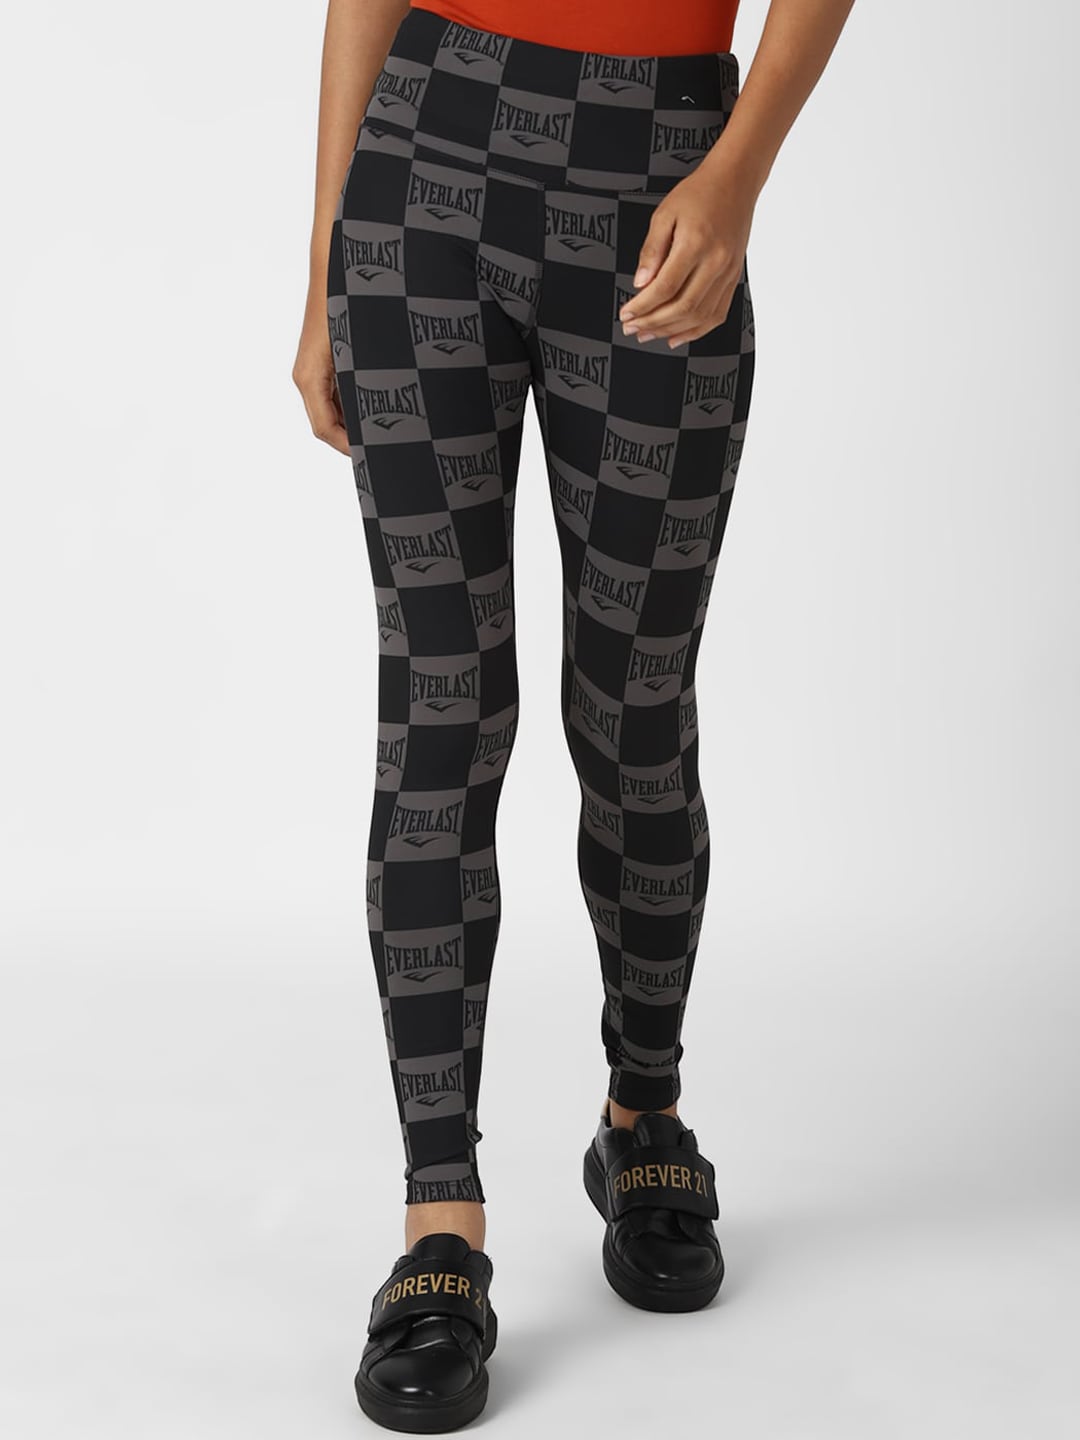 FOREVER 21 Women Black Printed Tights Price in India